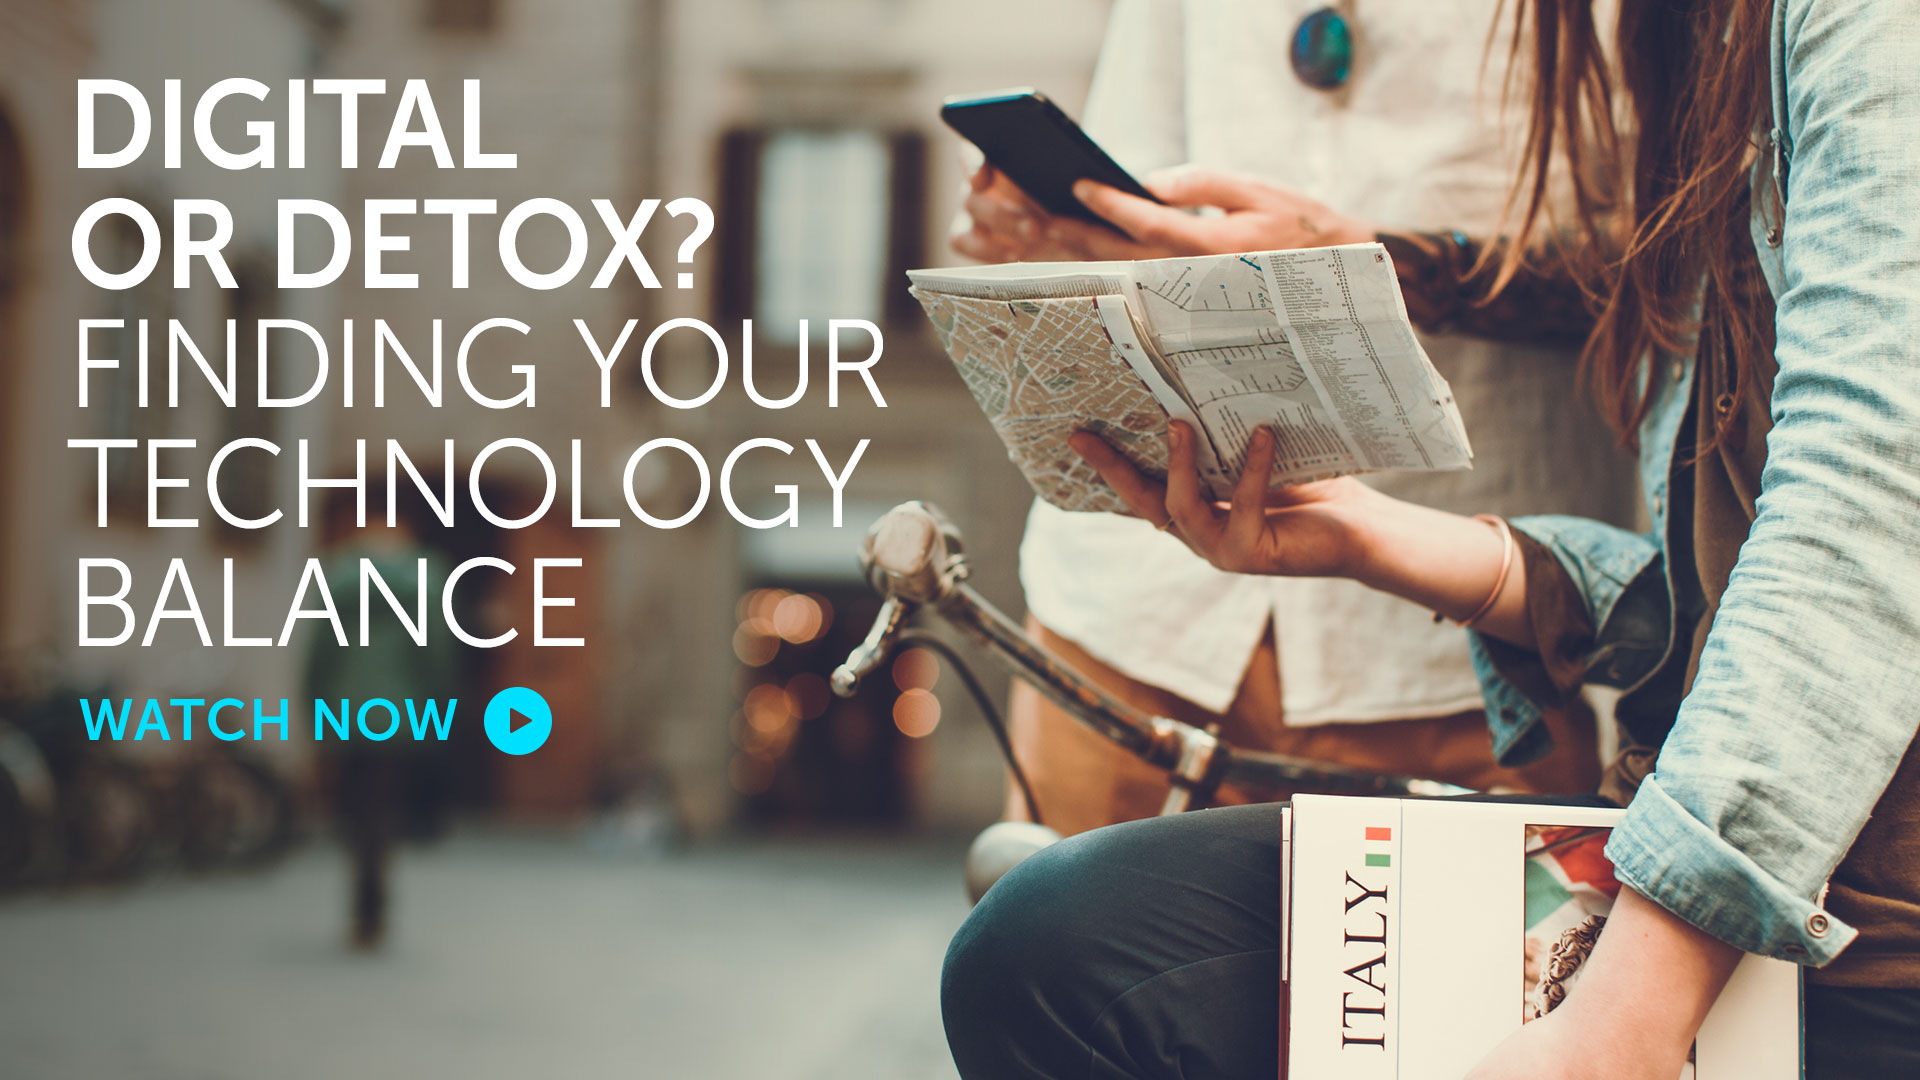 Briefing: Digital or Detox? Finding your technology balance